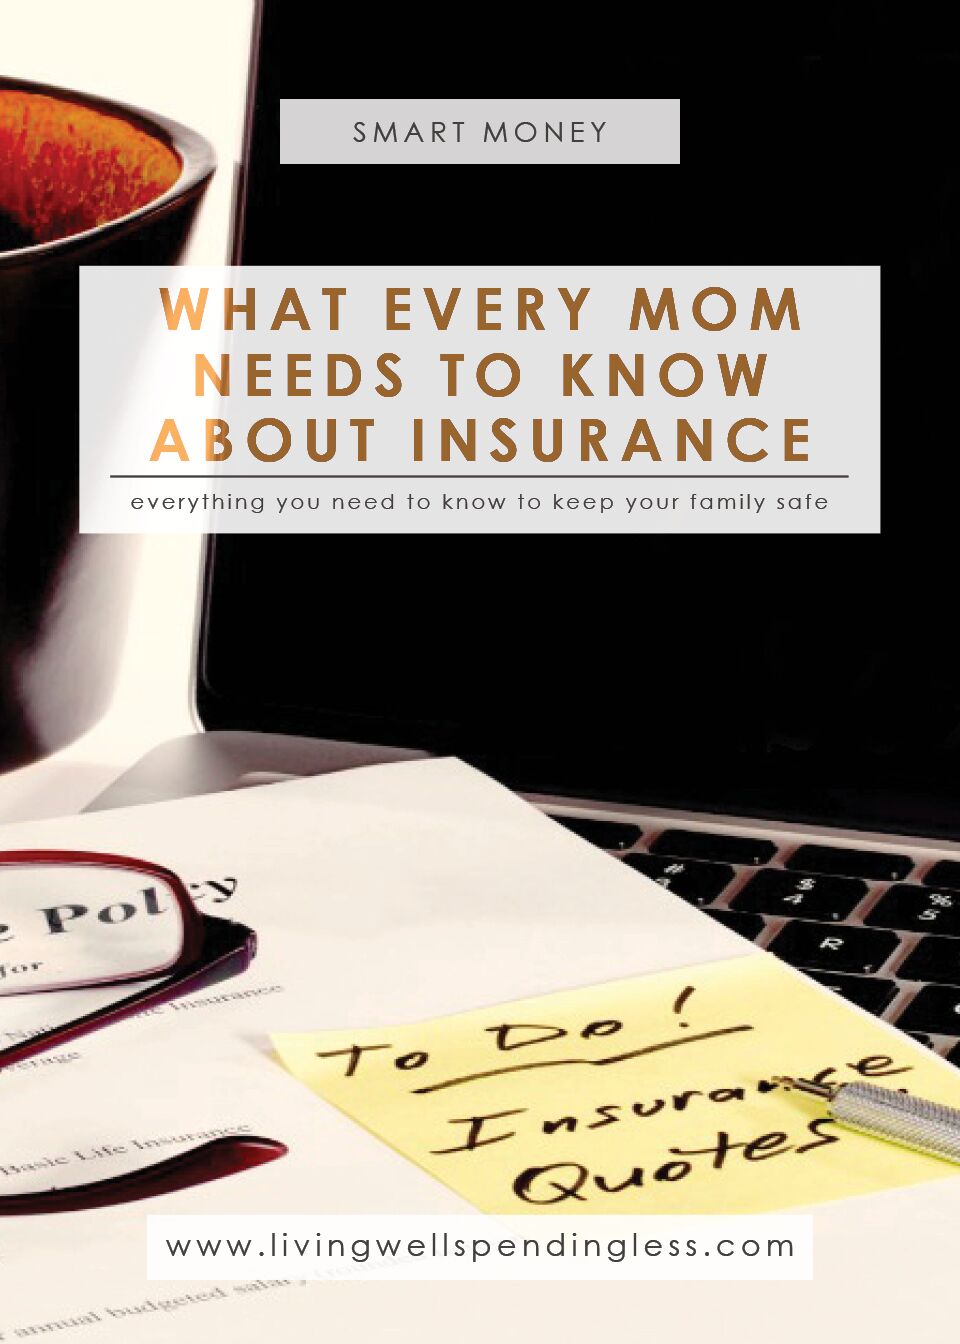 Every Mom Needs to Know About Insurance | Budgeting 101 | Home 101 | Insurance | Money Saving Tips | Saving & Investing